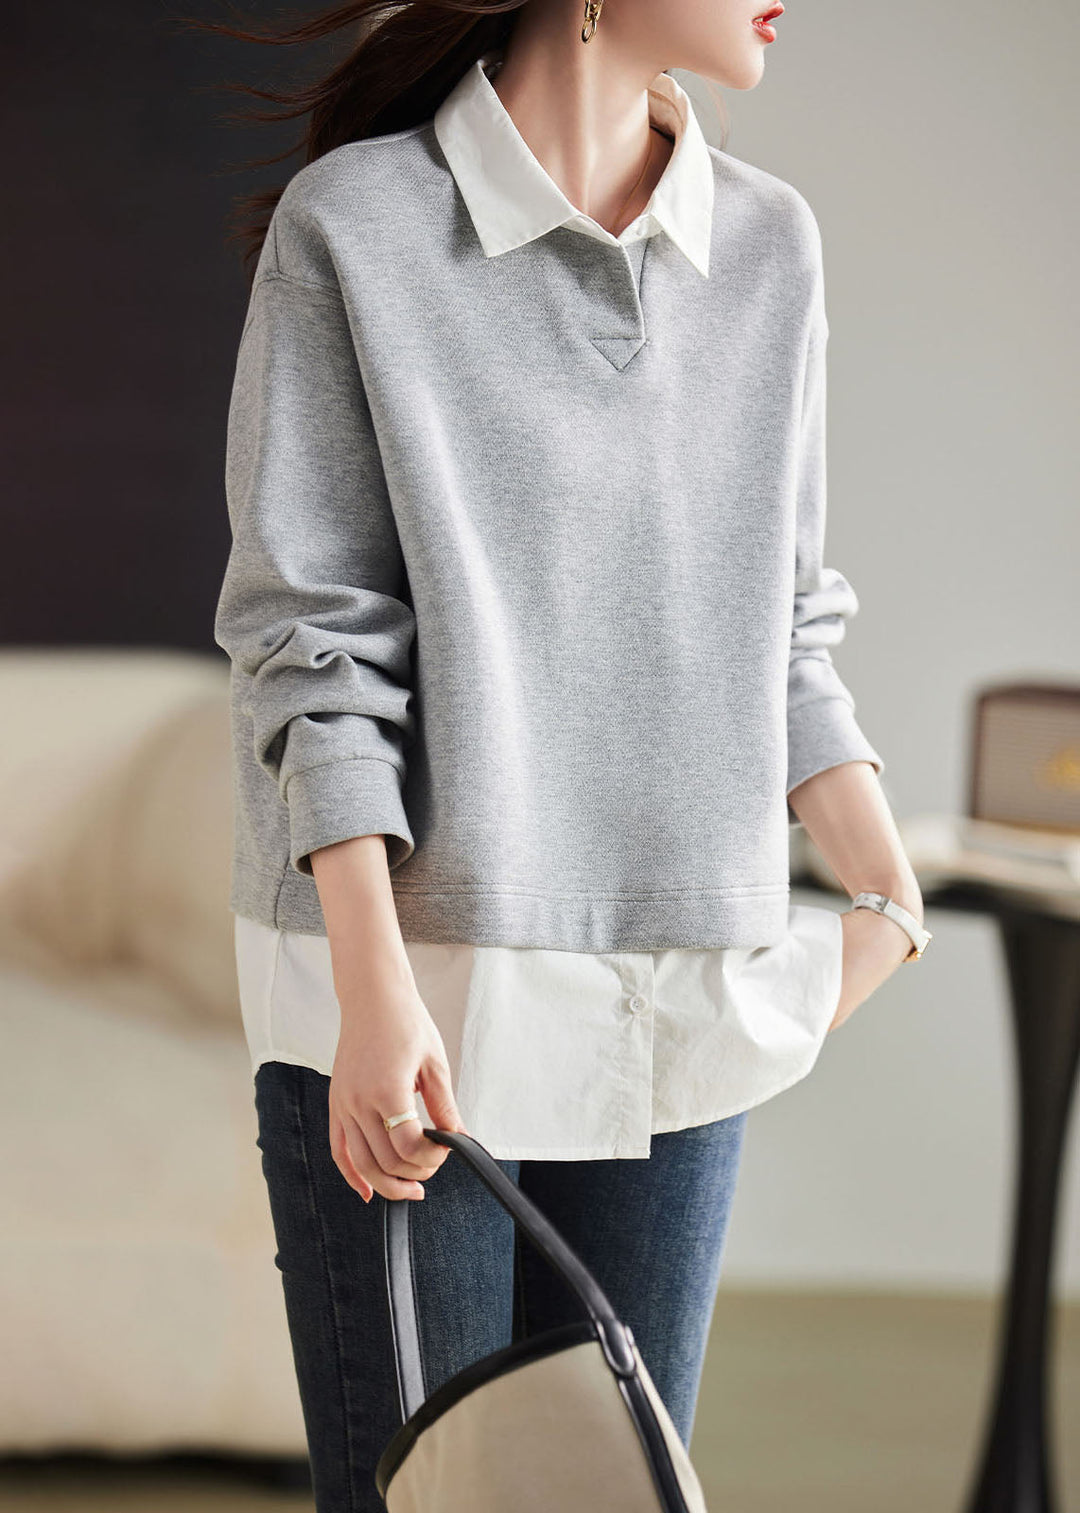 Casual Coffee Peter Pan Collar Patchwork Fake Two Pieces Pullover Long Sleeve